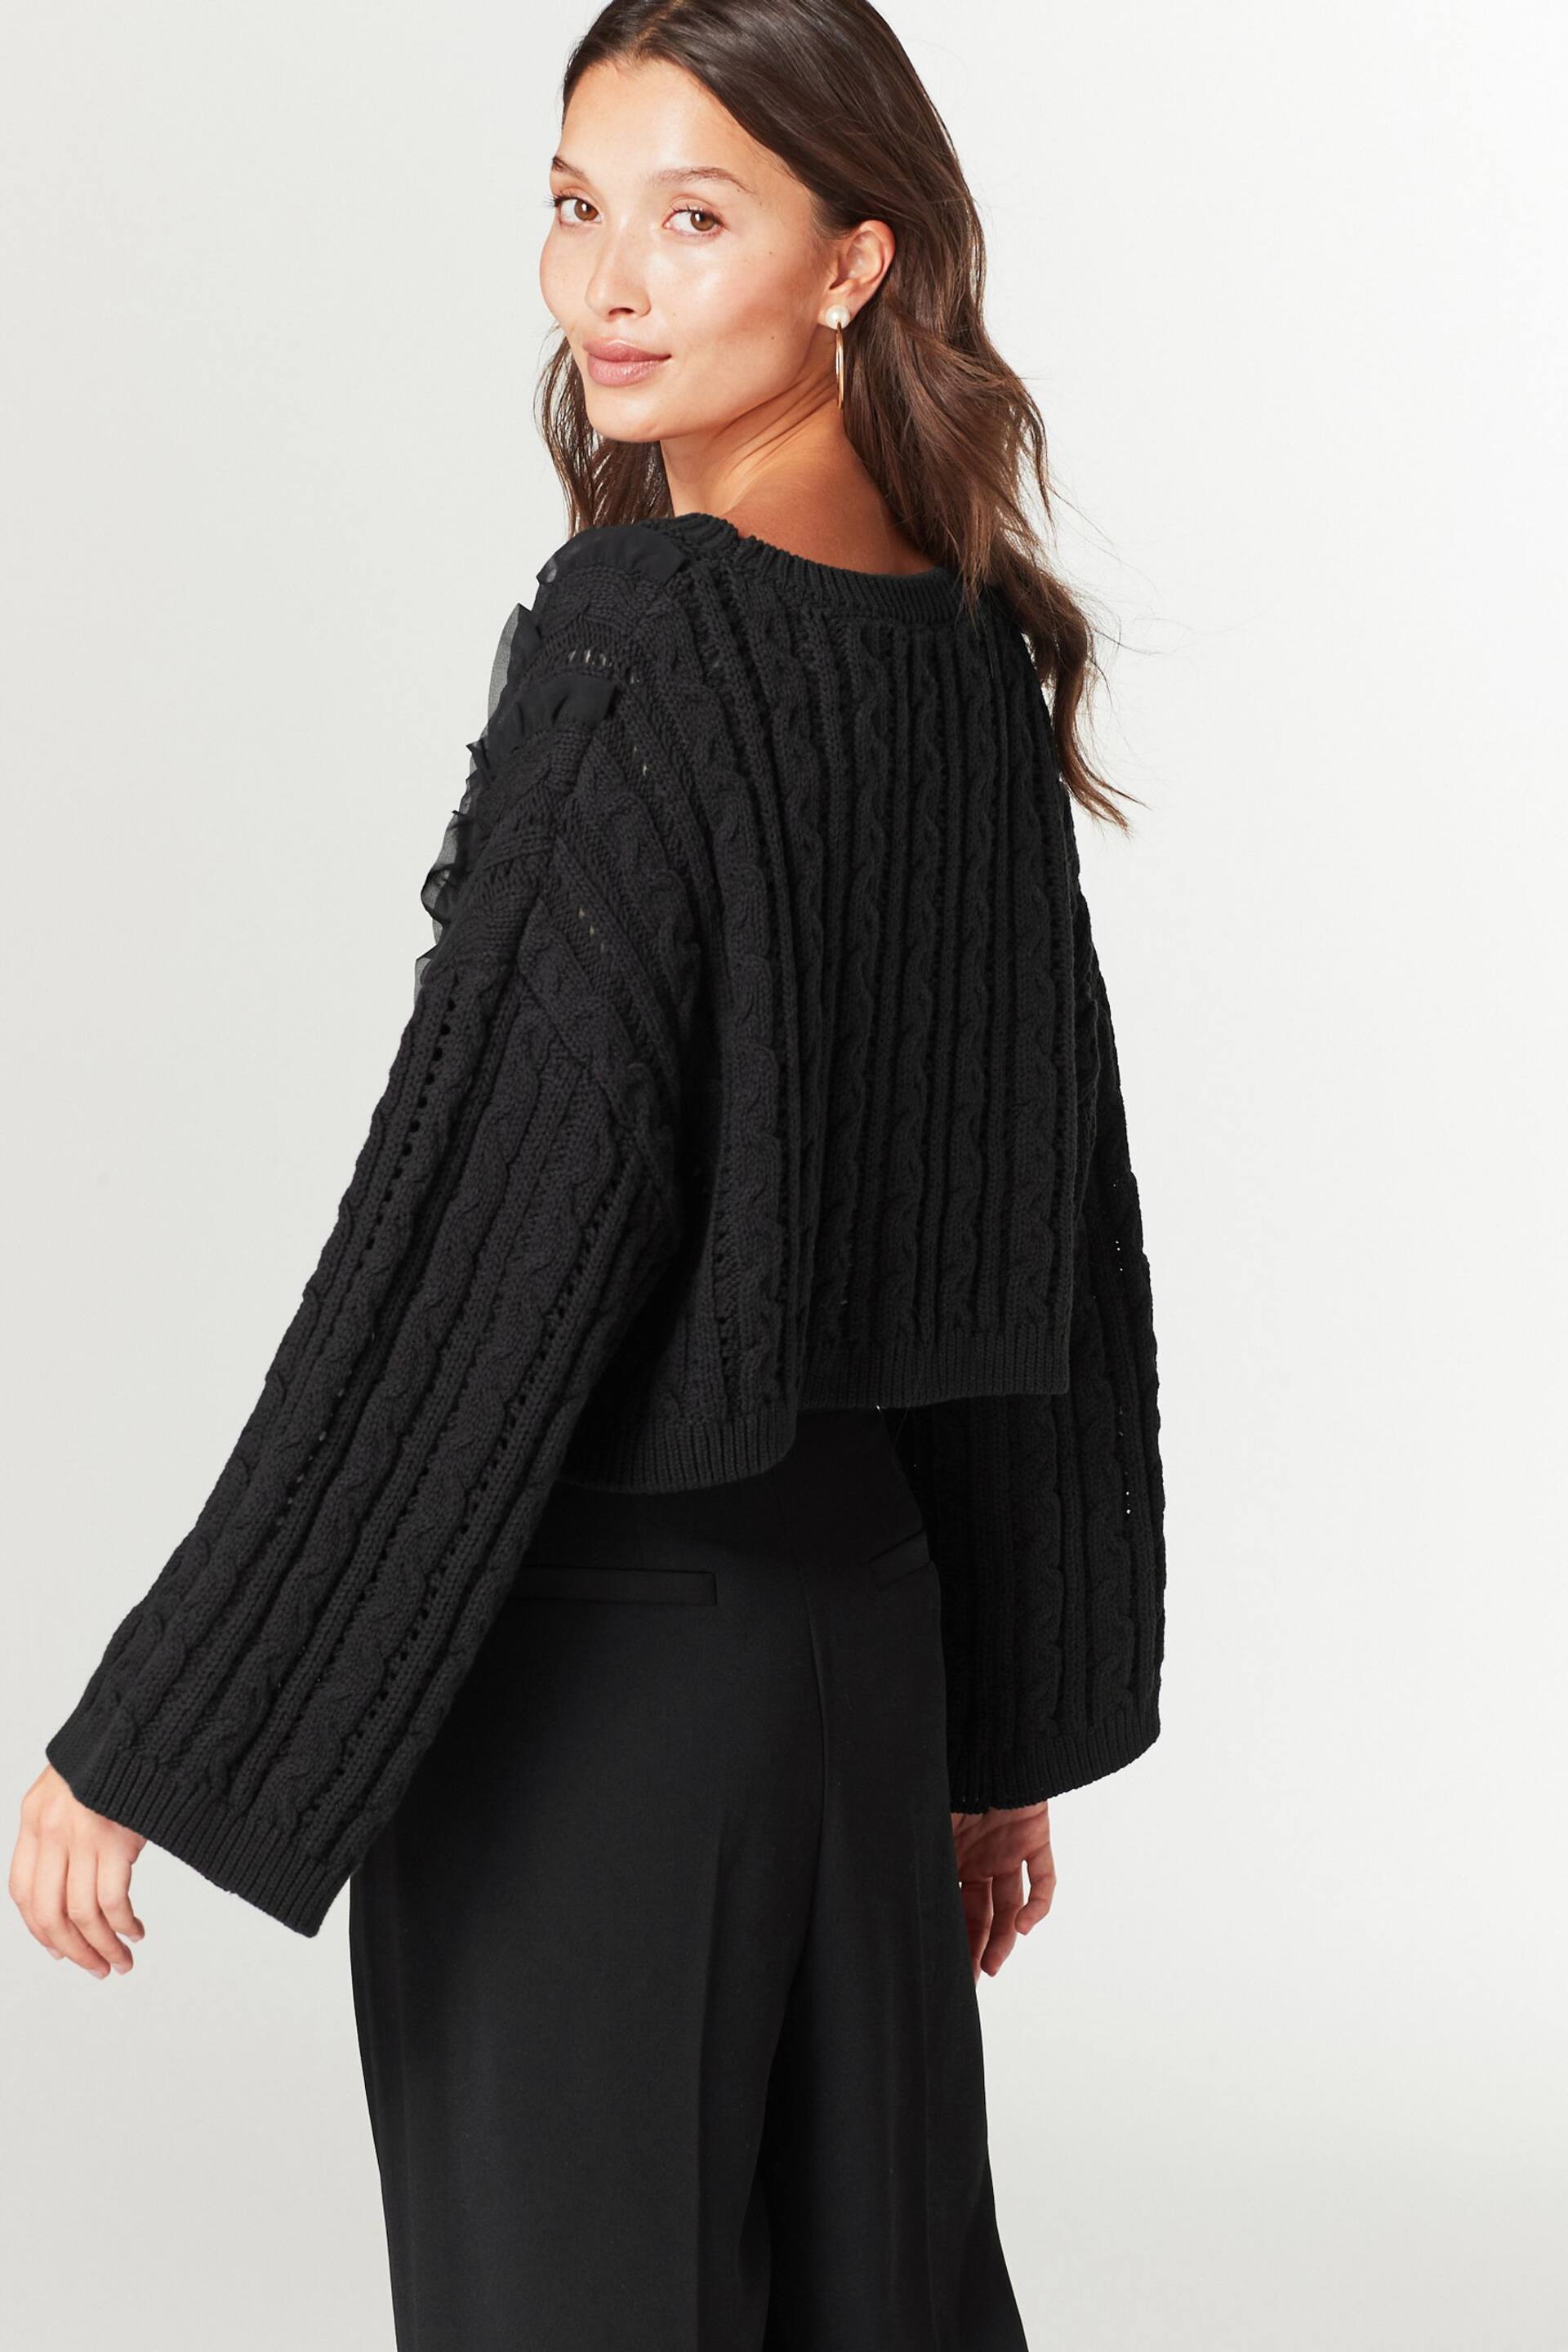 Black Ruffle Cable Long Sleeve Jumper - Image 3 of 6